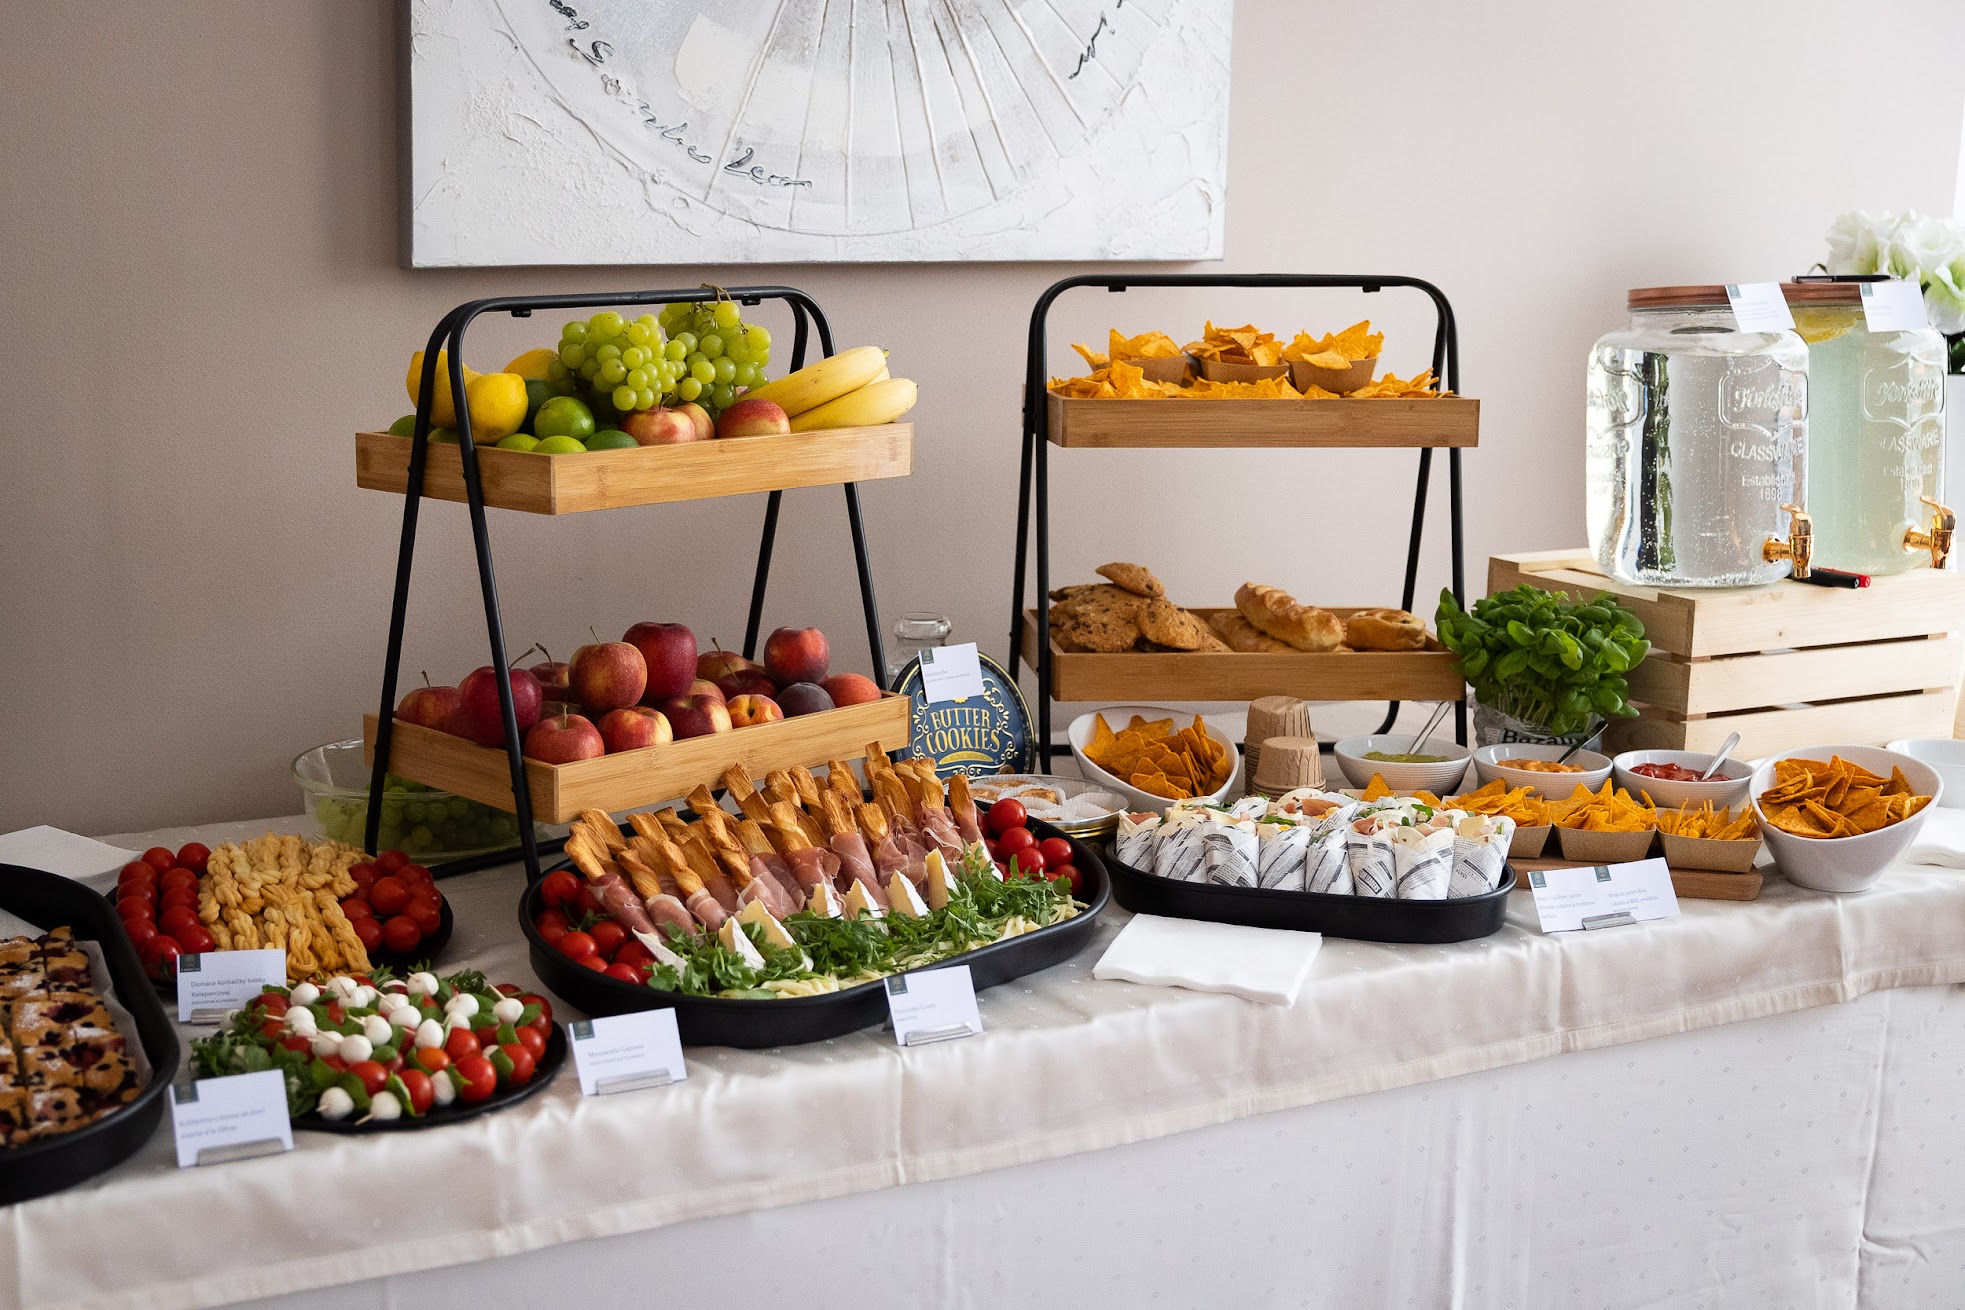 Librum Event: Fresh and Healthy Catering